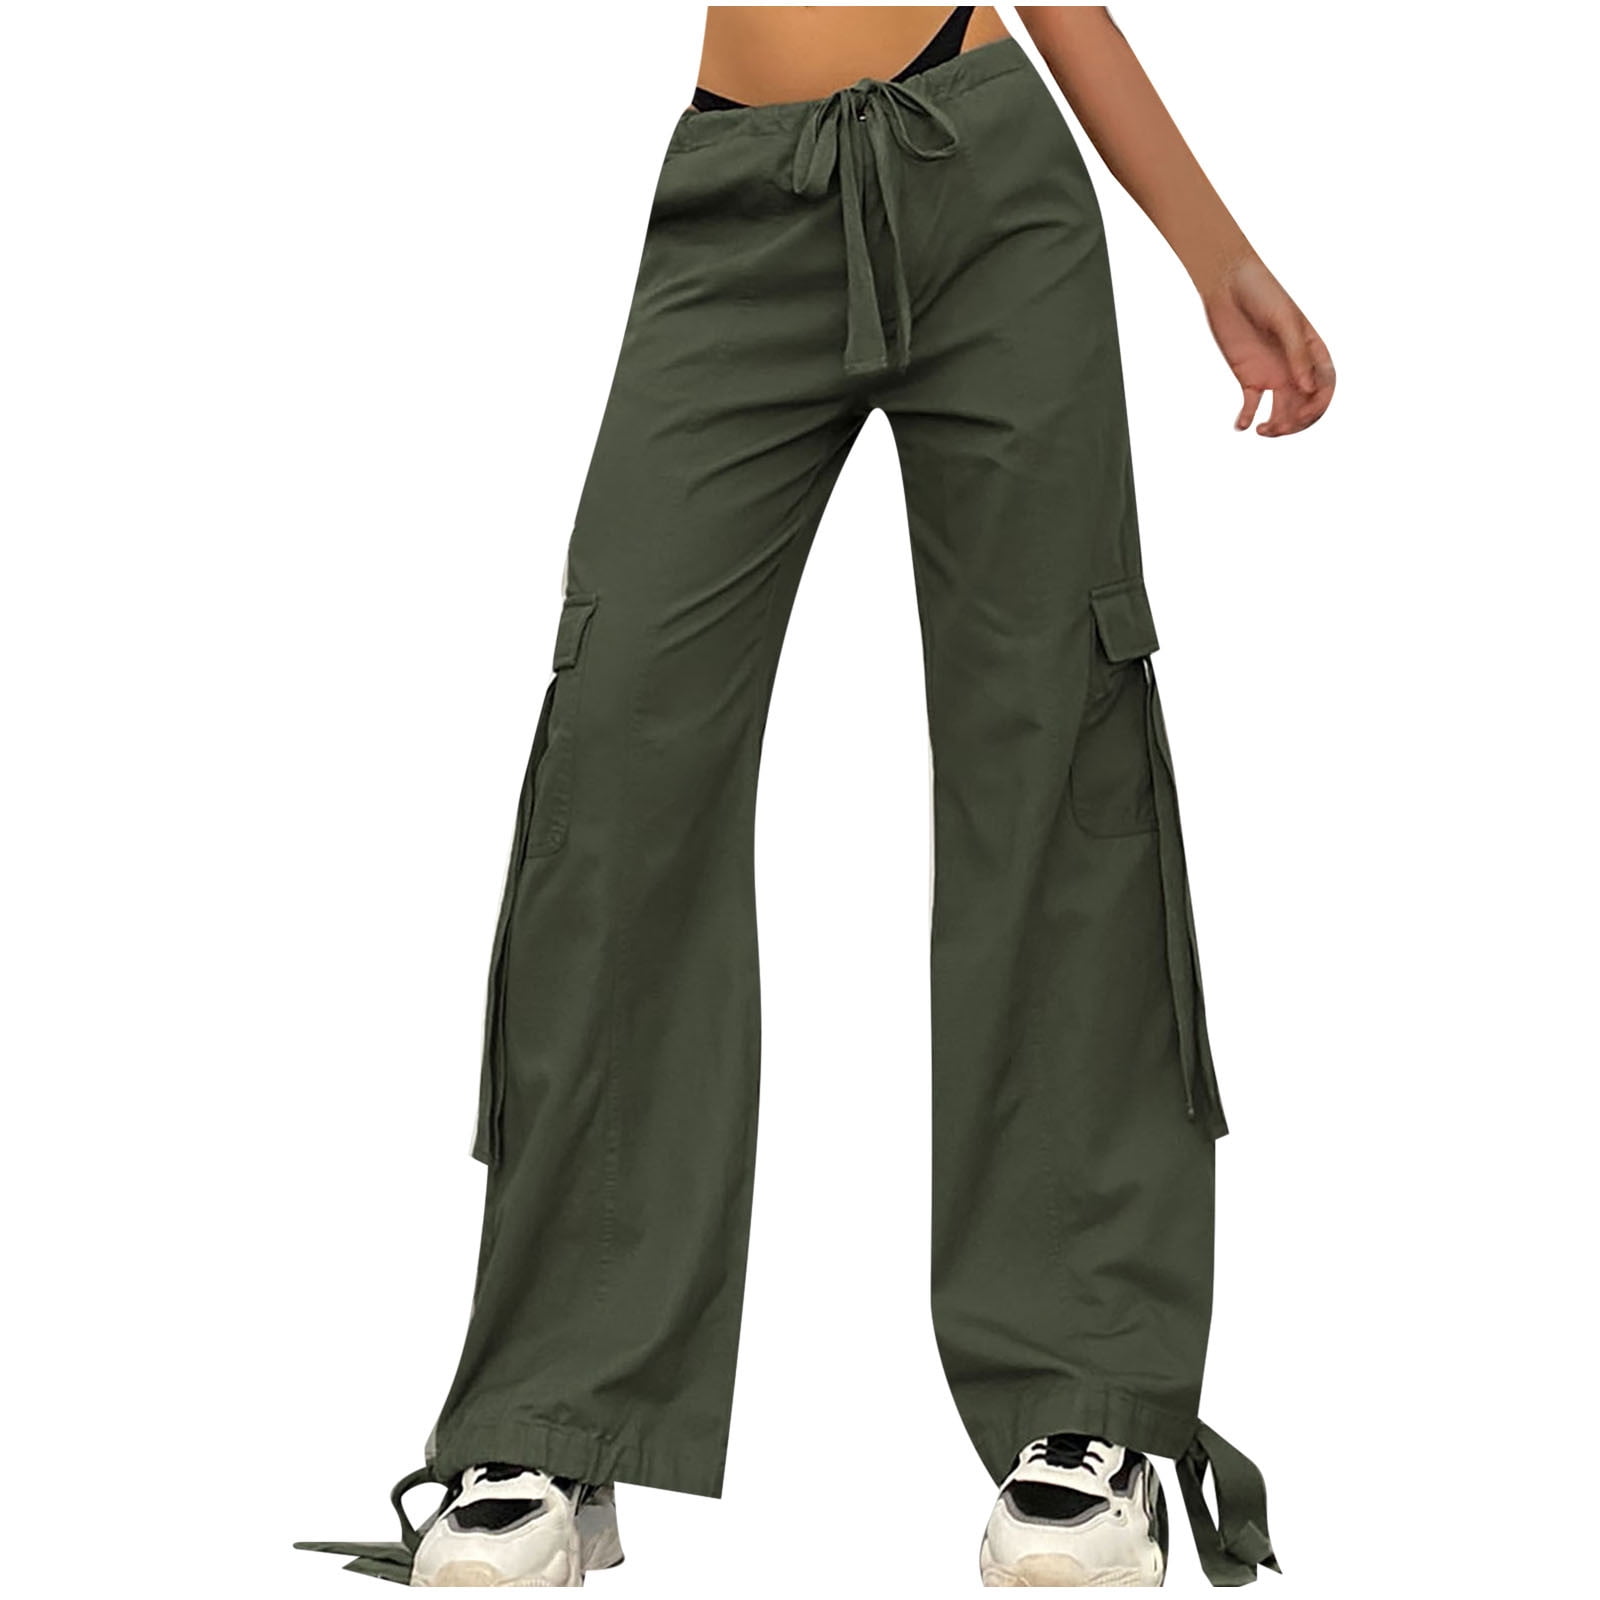 RQYYD Cargo Pants Women Casual Loose High Waisted Straight Leg Baggy Pants  Trousers Lightweight Outdoor Travel Pants with Pockets(Army Green,XL)